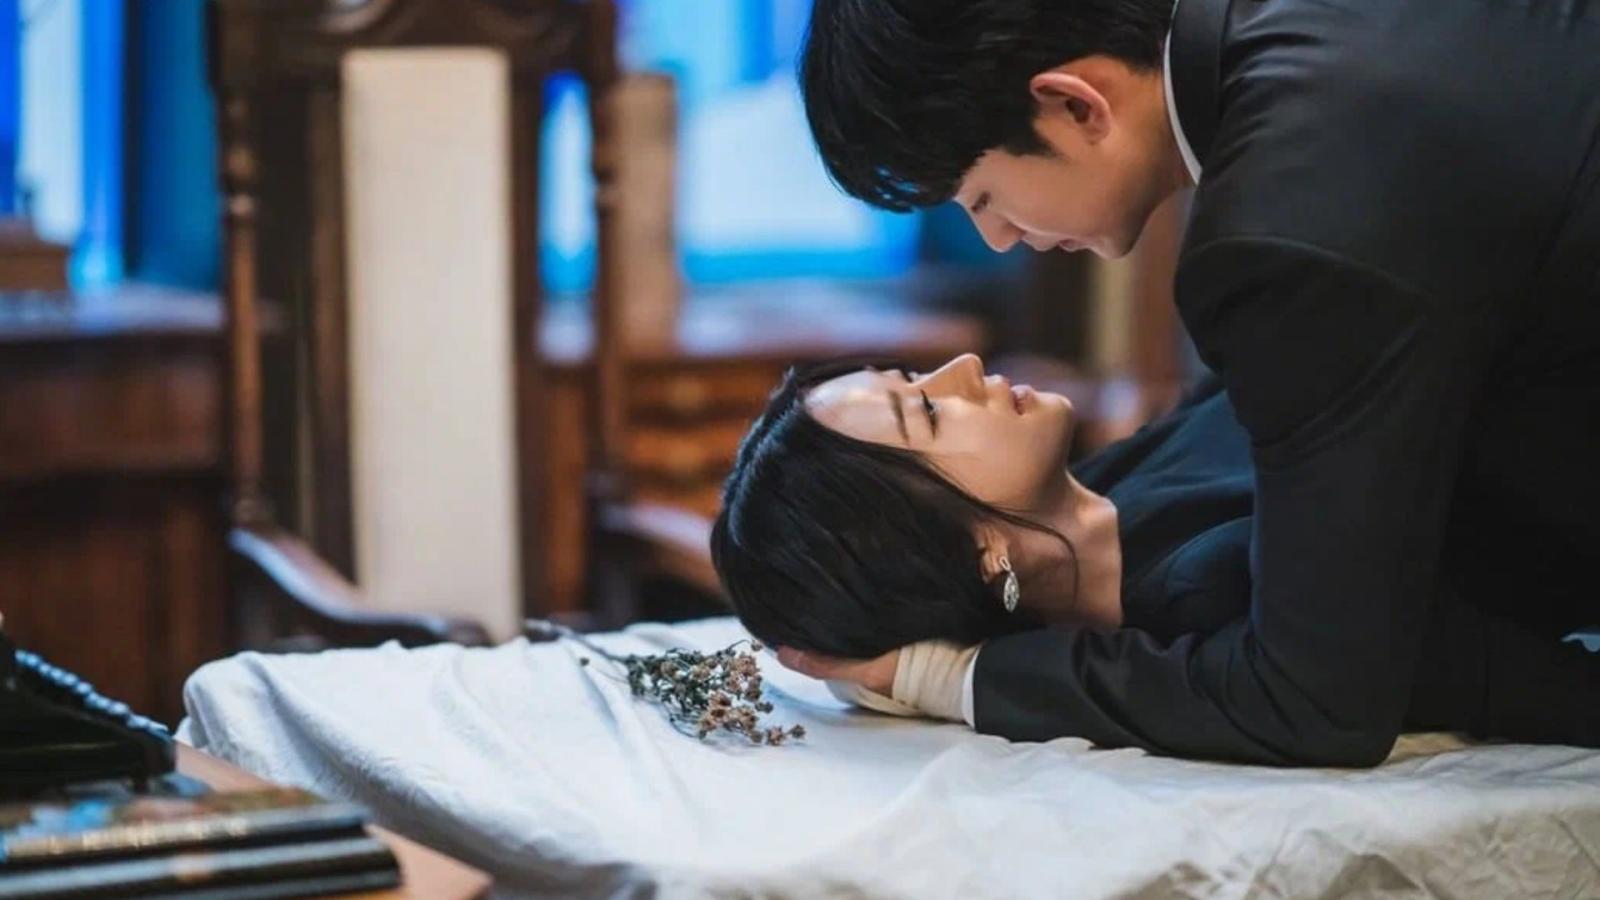 New to K-Drama? Here Are 15 Beginner-Friendly Shows to Watch - image 3